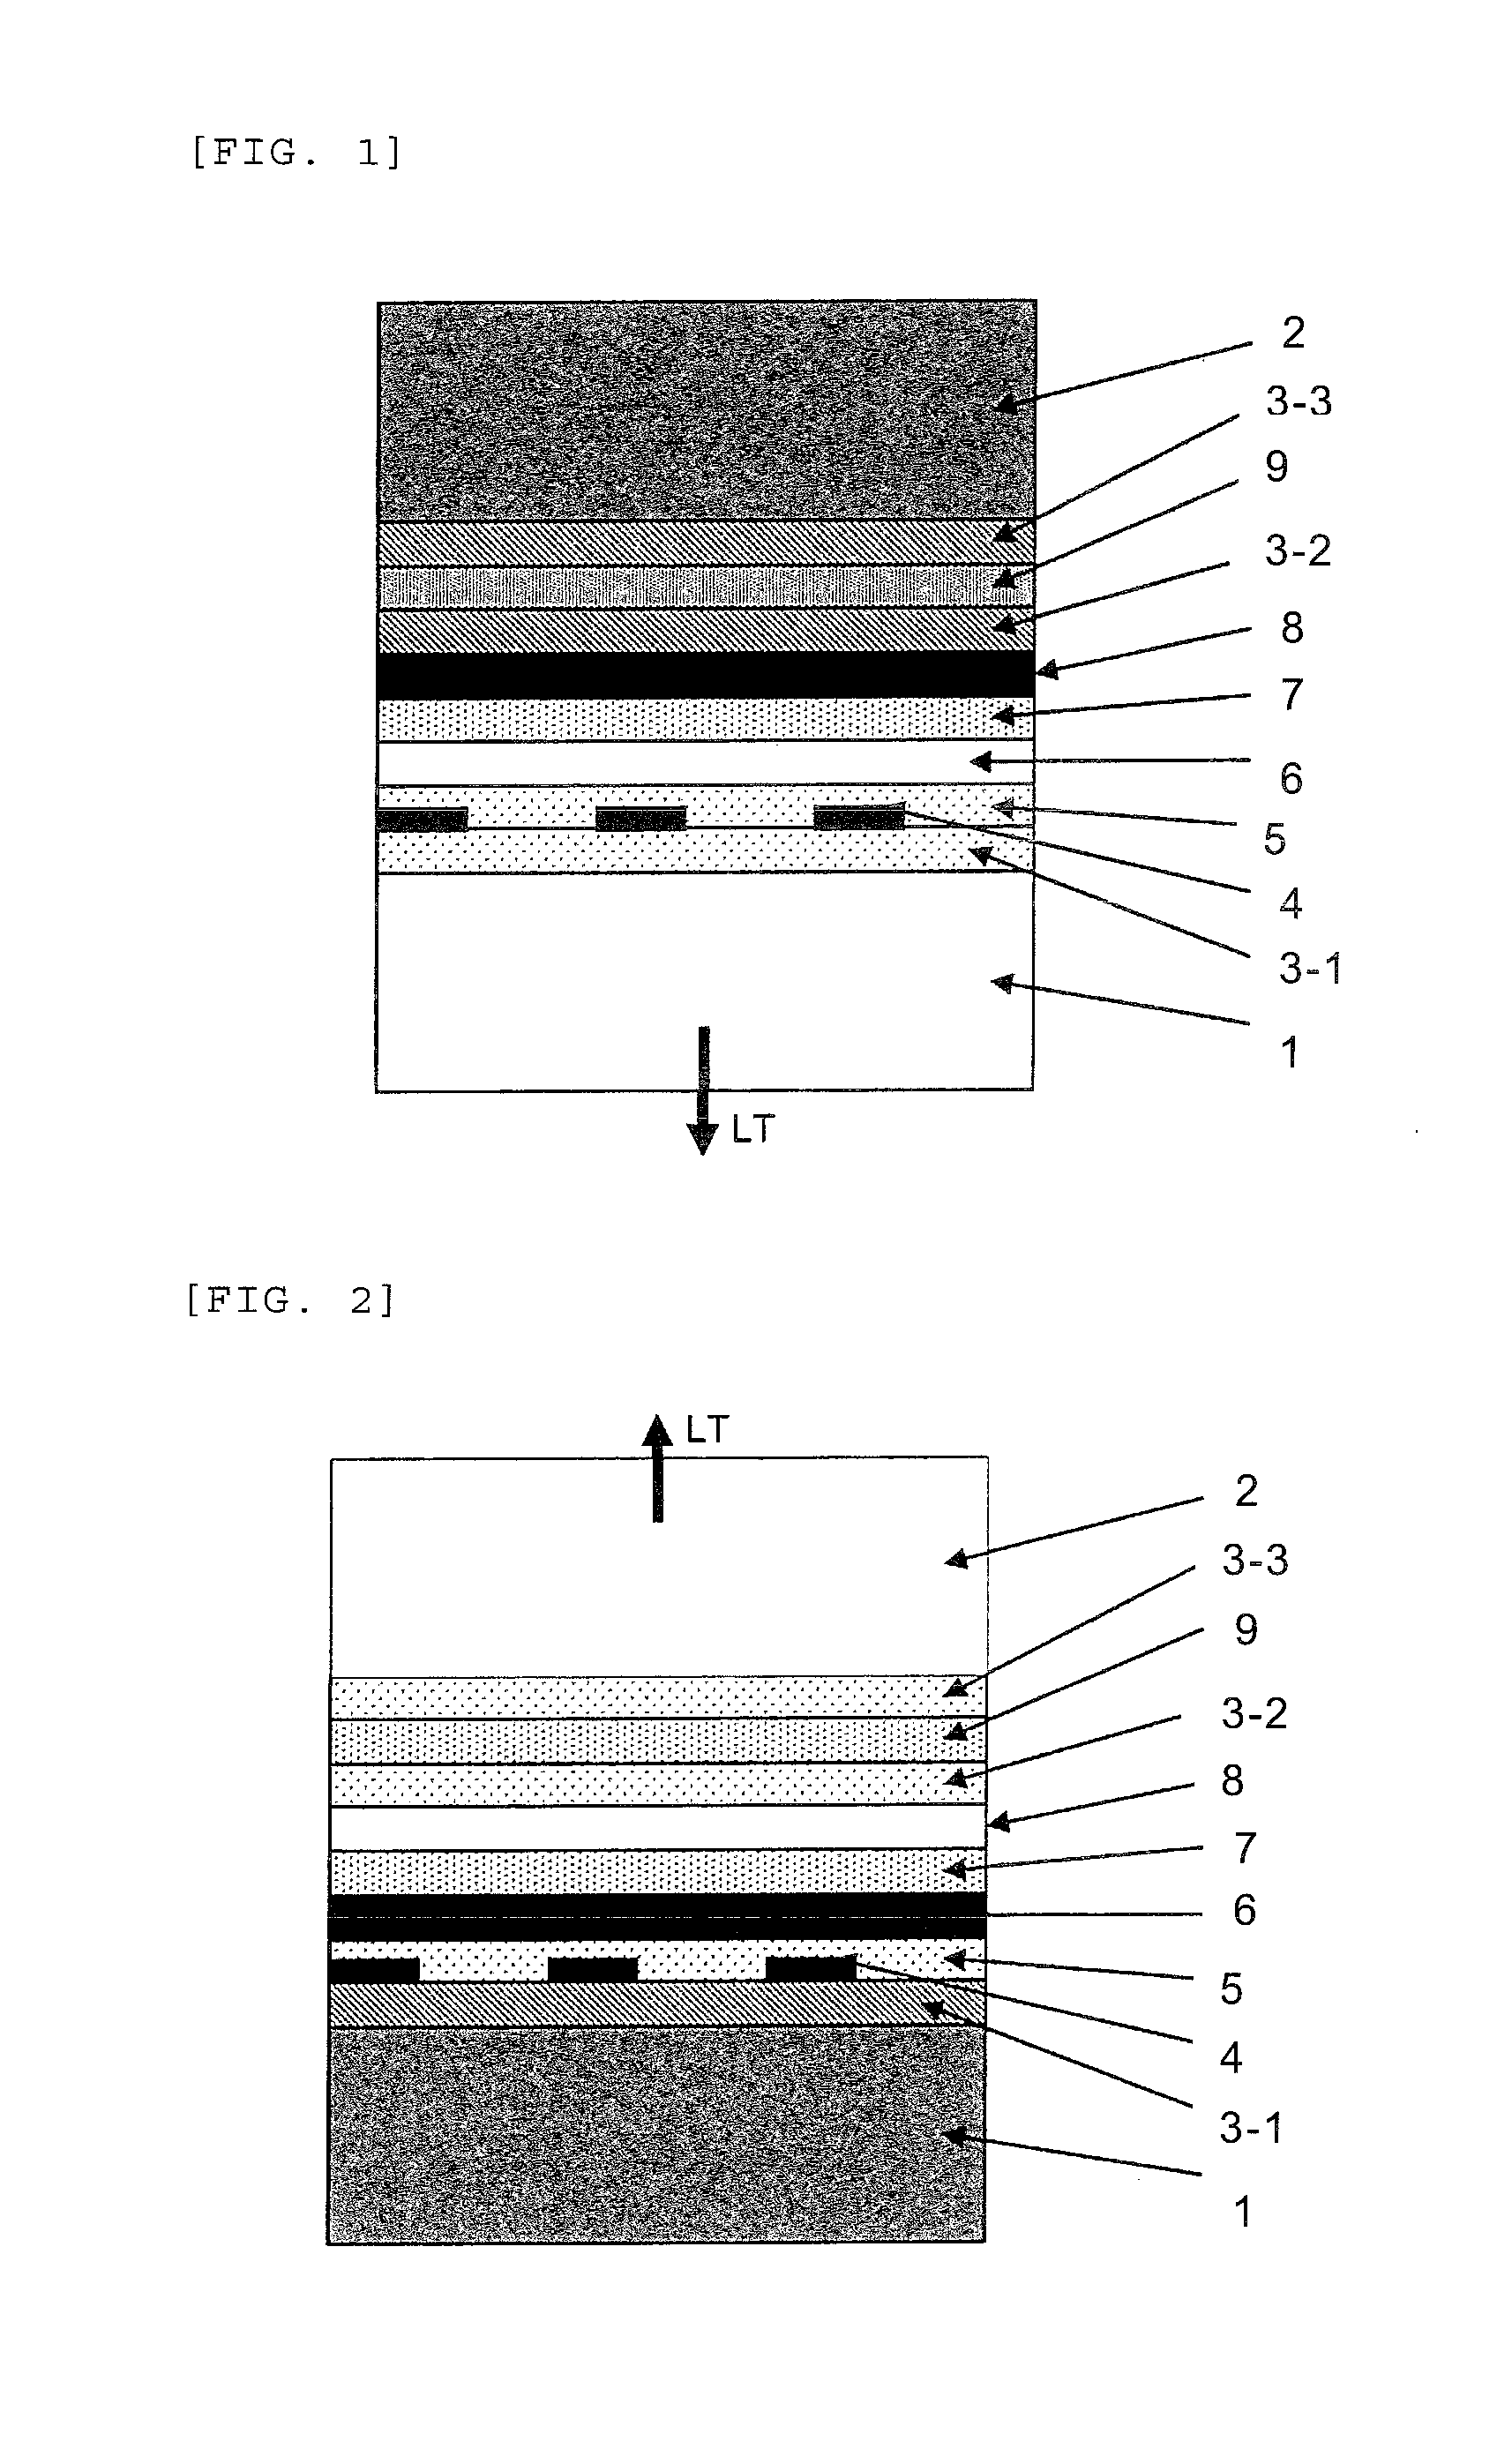 Display device, method for manufacturing same, polyimide film for display device supporting bases, and method for producing polyimide film for display device supporting bases